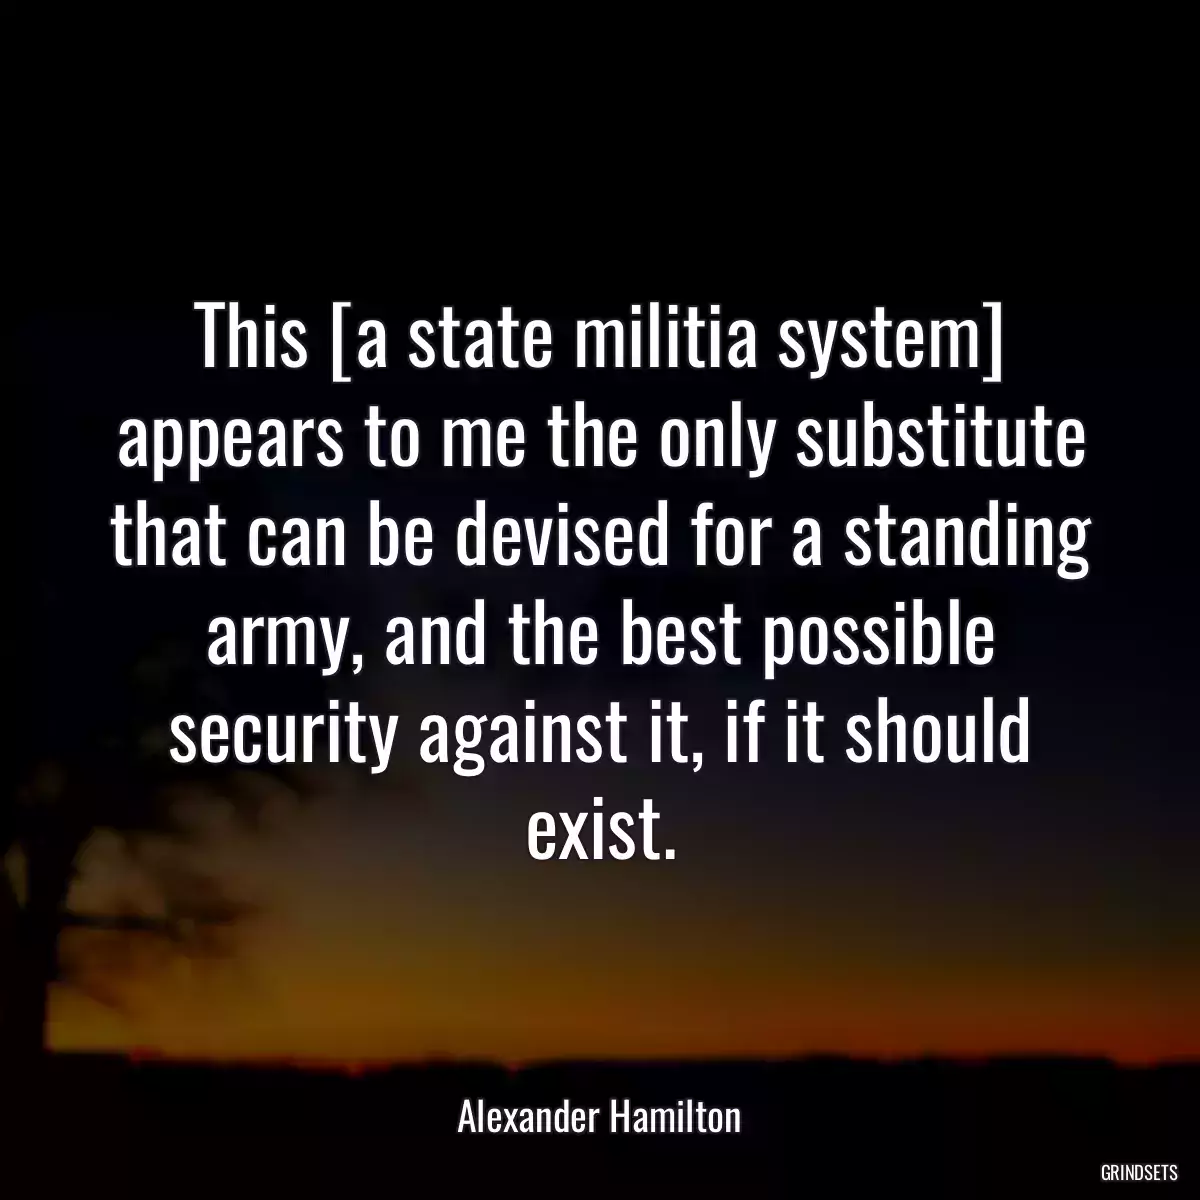 This [a state militia system] appears to me the only substitute that can be devised for a standing army, and the best possible security against it, if it should exist.